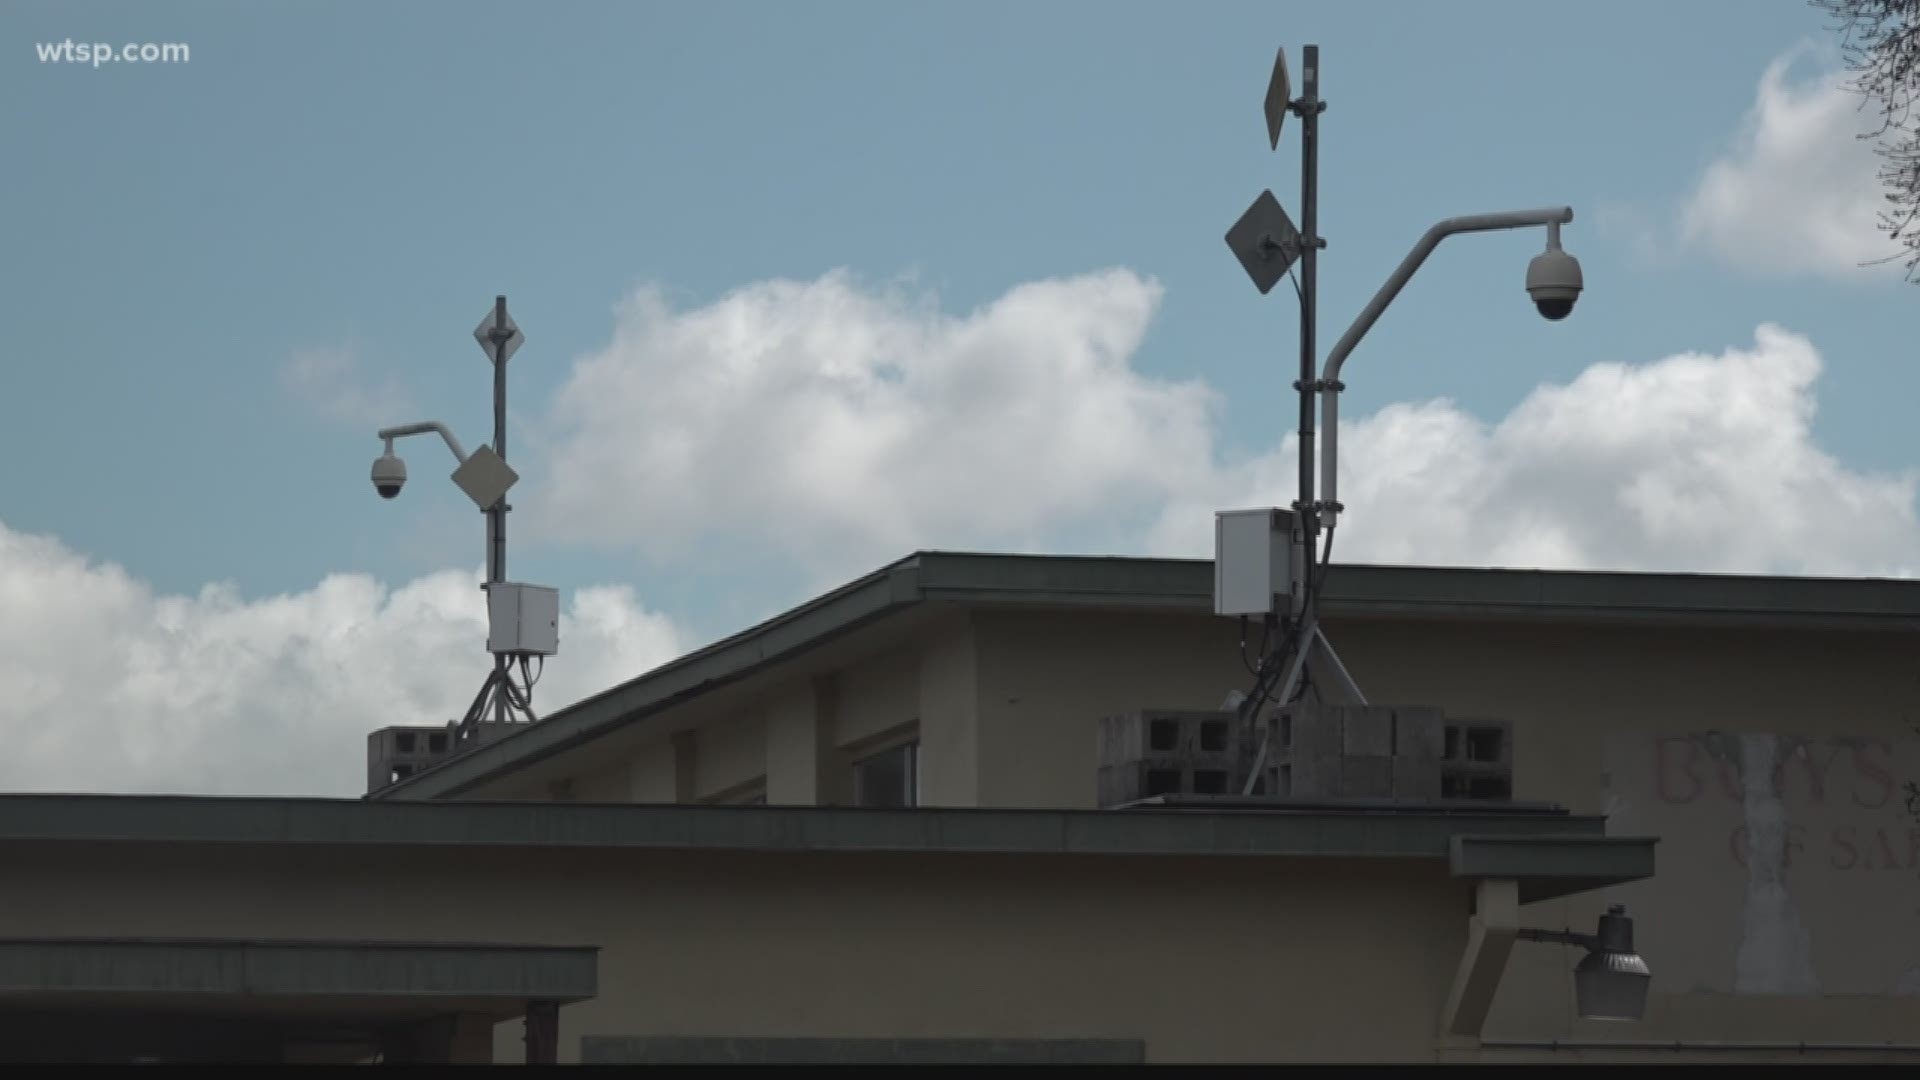 The city has budgeted $100,00 to assess all 200 cameras around the city to see how many need to be fixed or replaced.